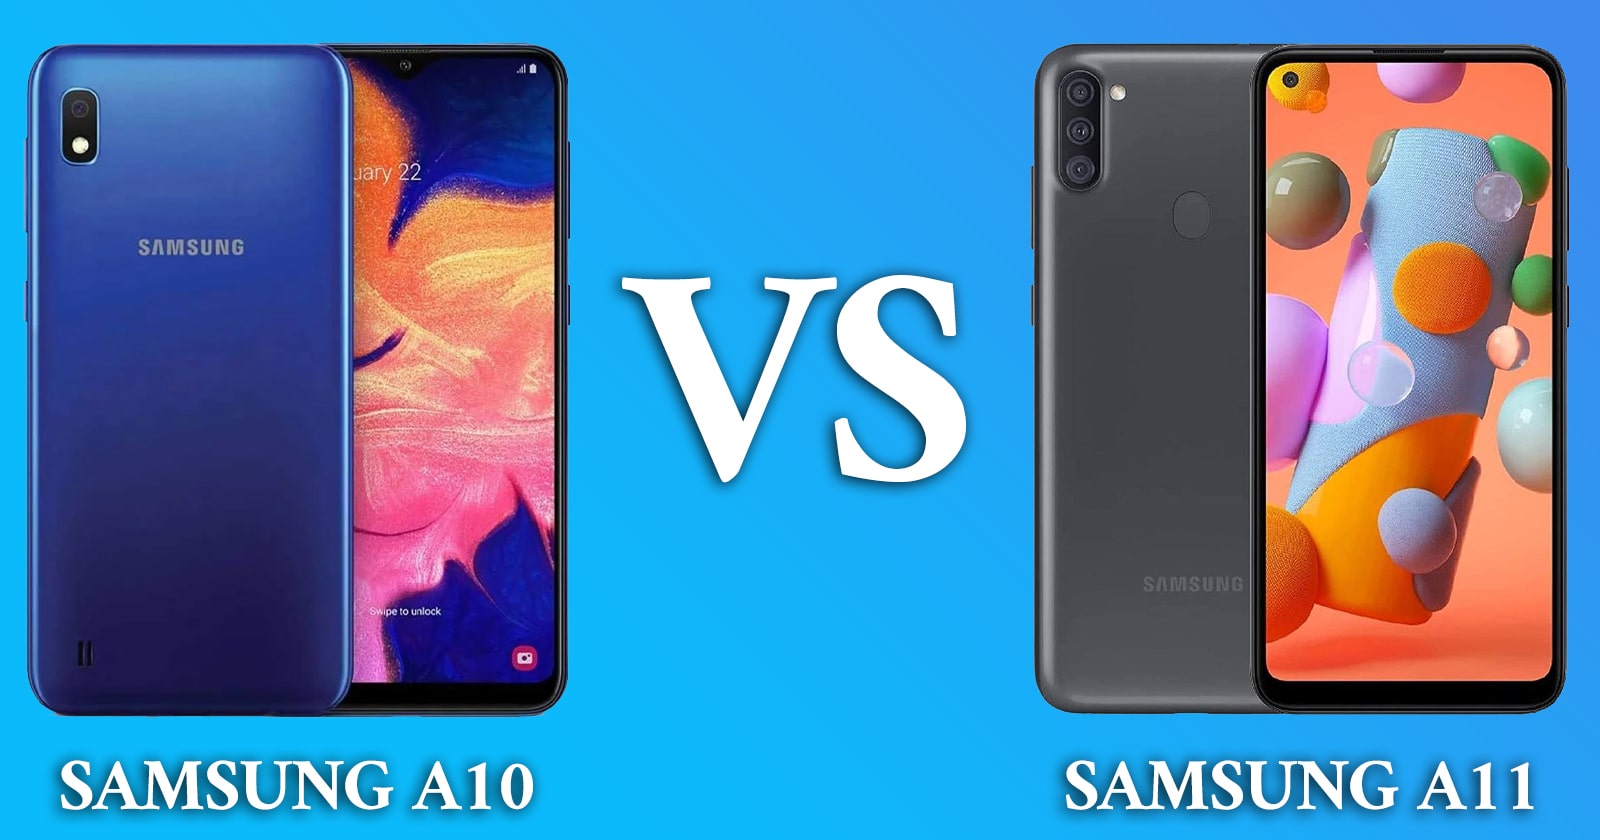 What Is the Difference Between Samsung A10 and A11